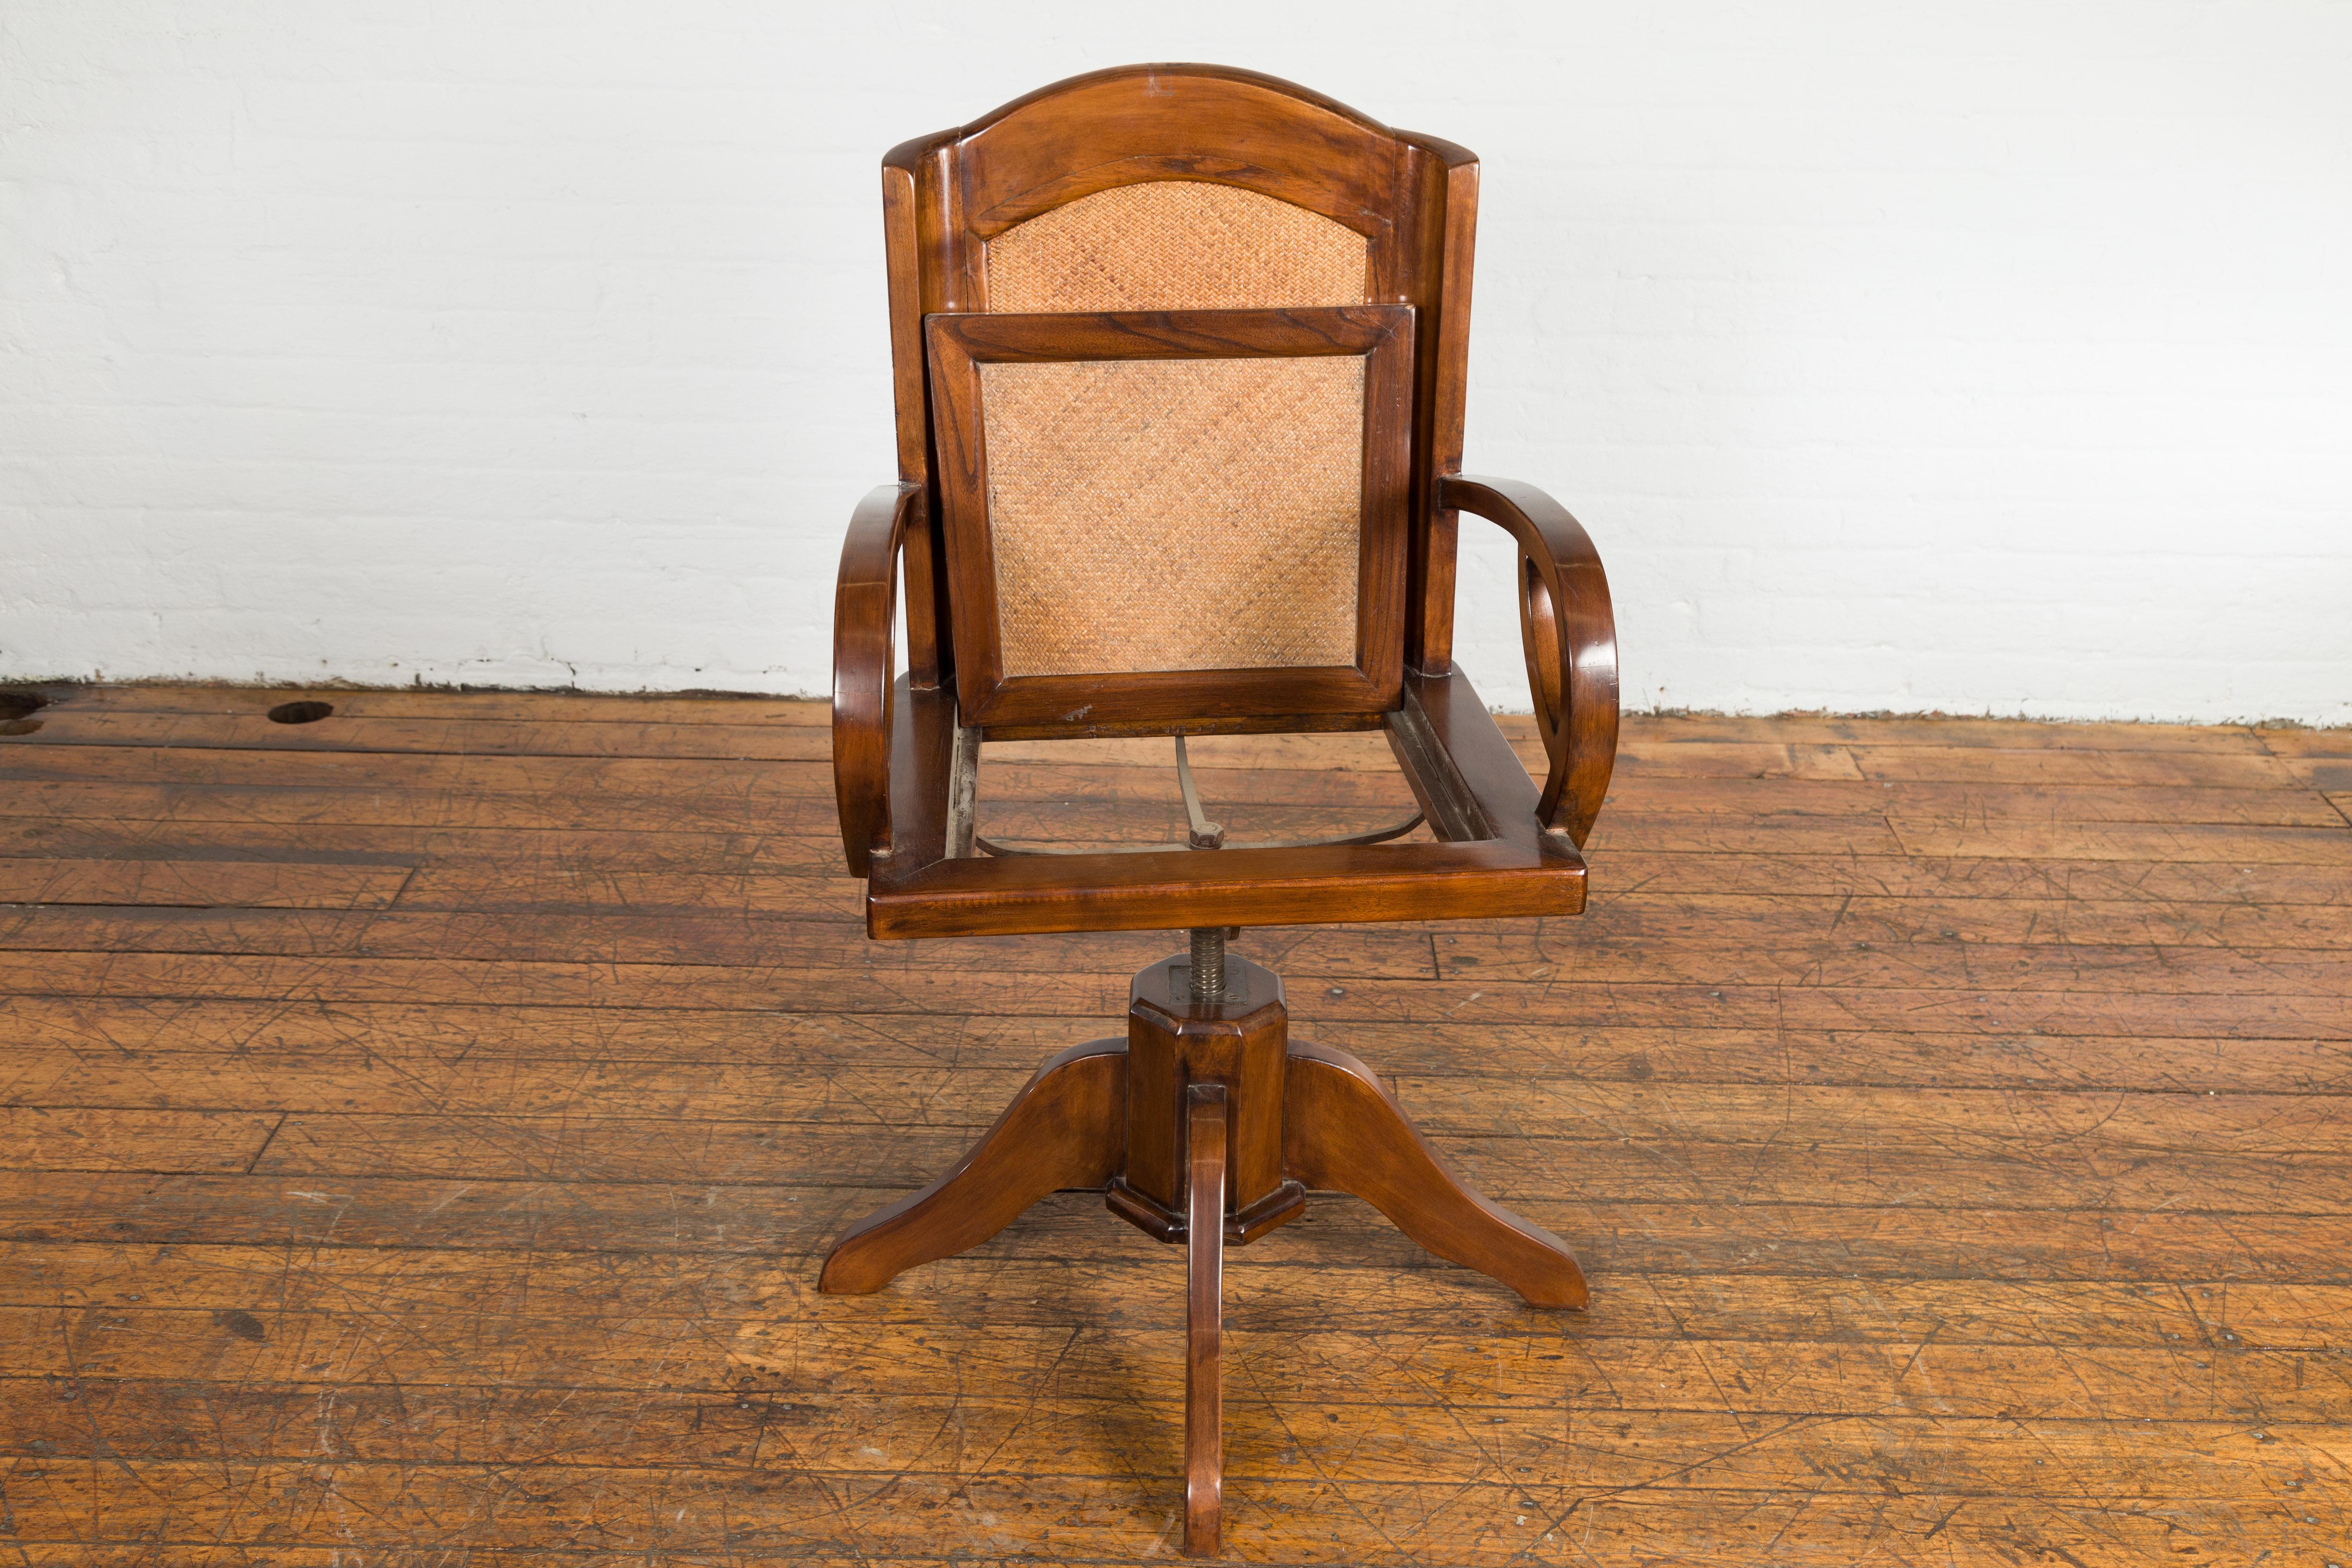 Indonesian 1940s Art Deco Style Swivel Desk Chair with Woven Rattan and Loop Arms For Sale